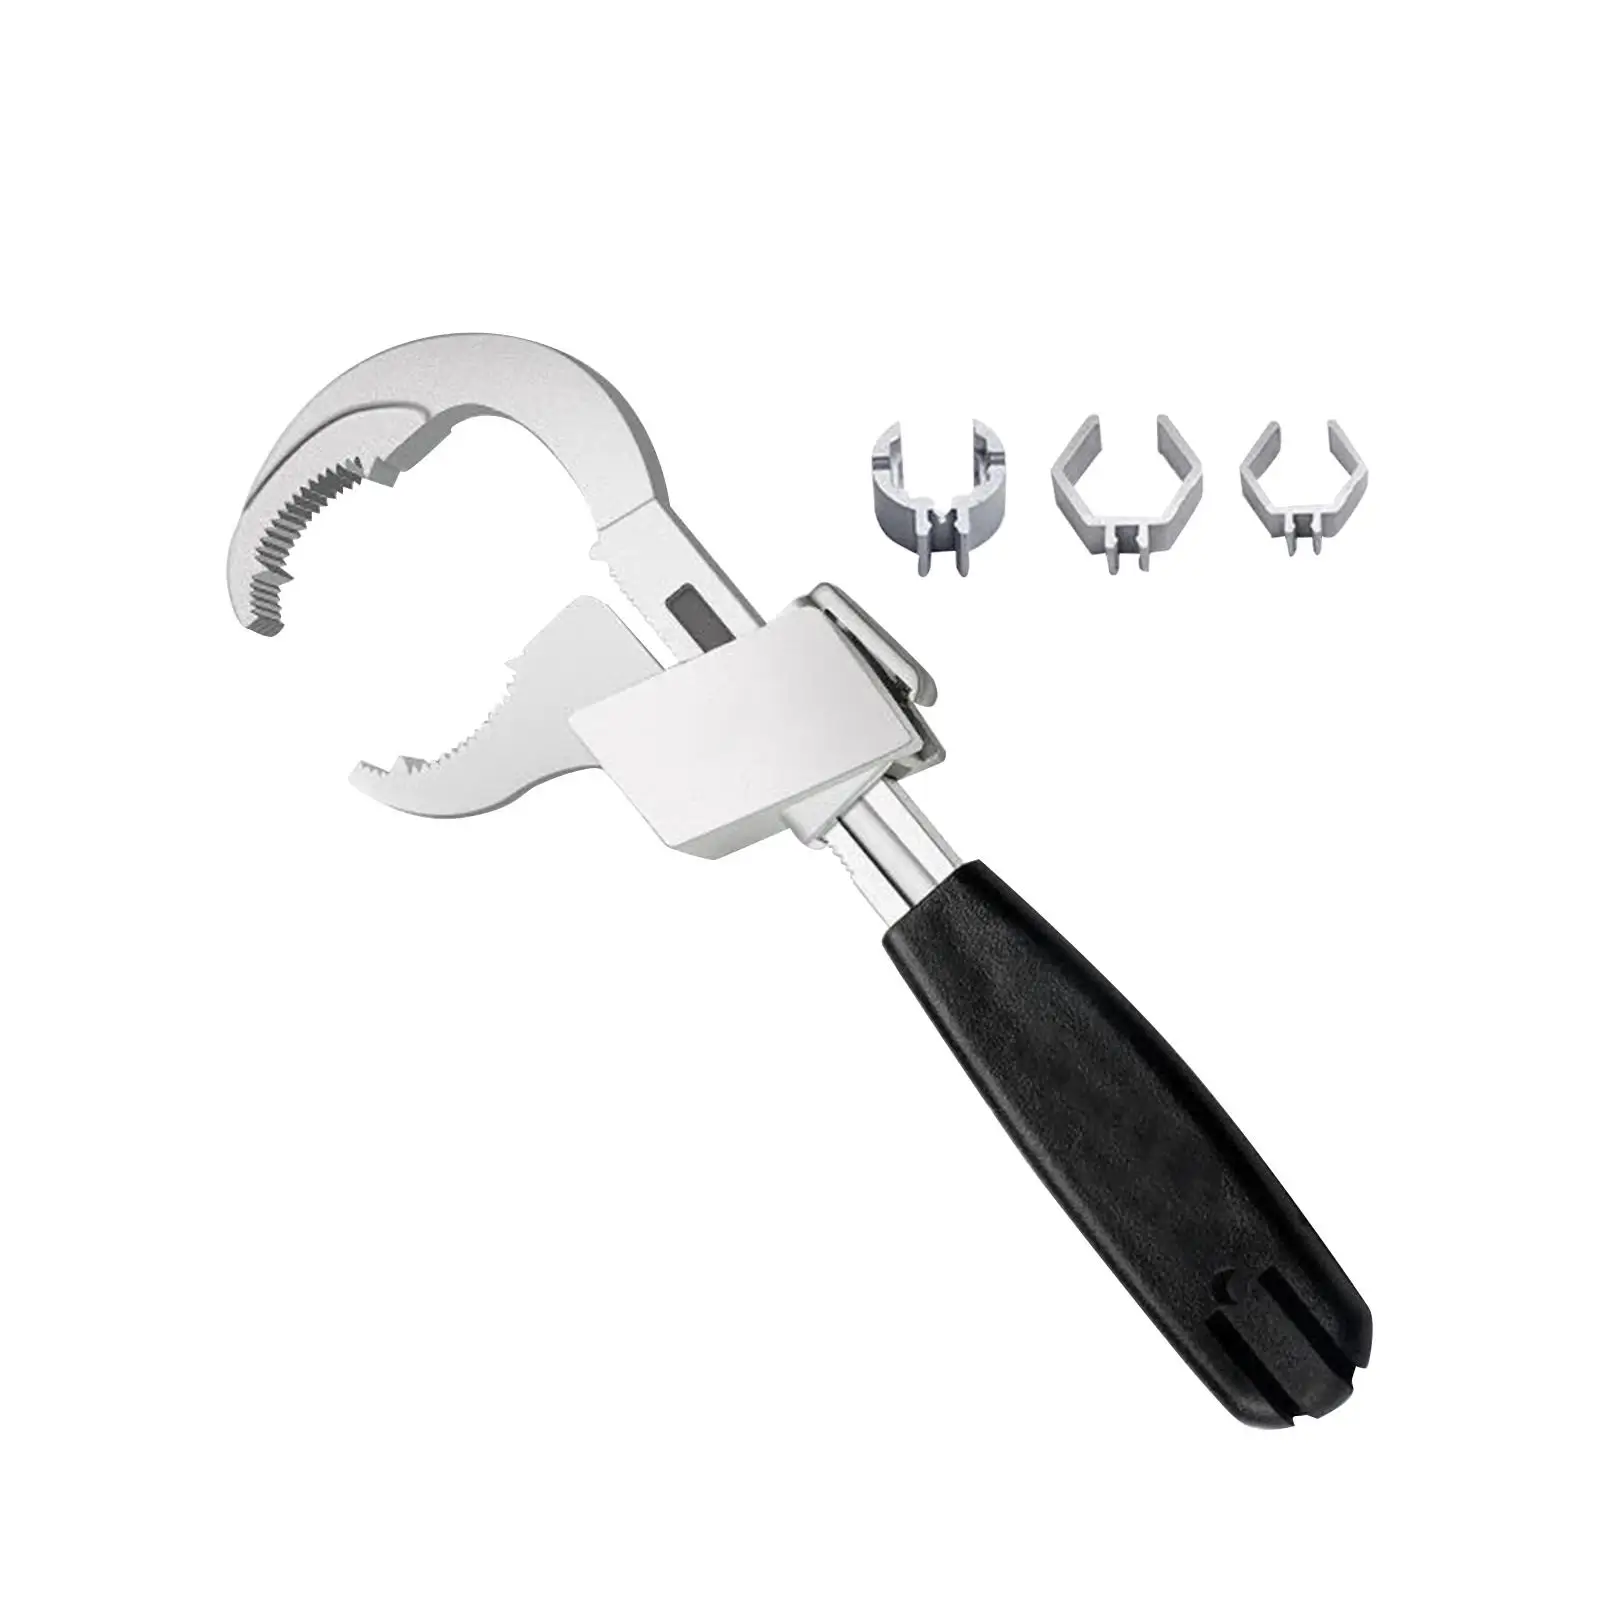 Multifunctional Sink Wrench Faucet Spanner Adjustable Double Ended Wrench for Small Spaces